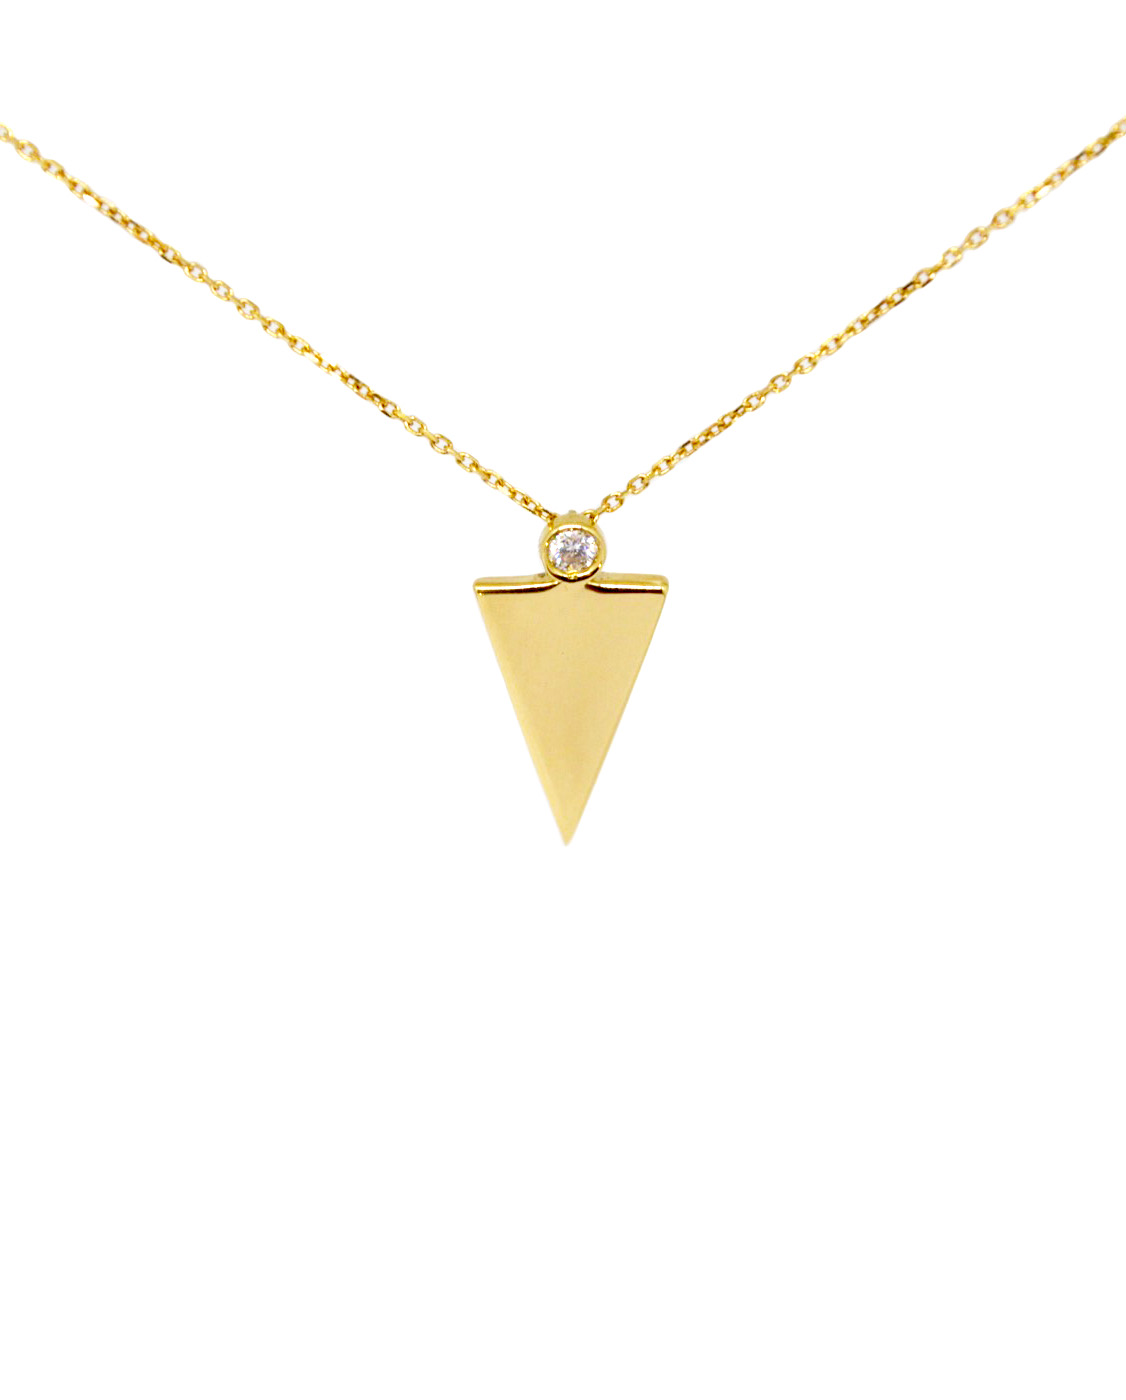 Inverted Triangle Pendant Necklace